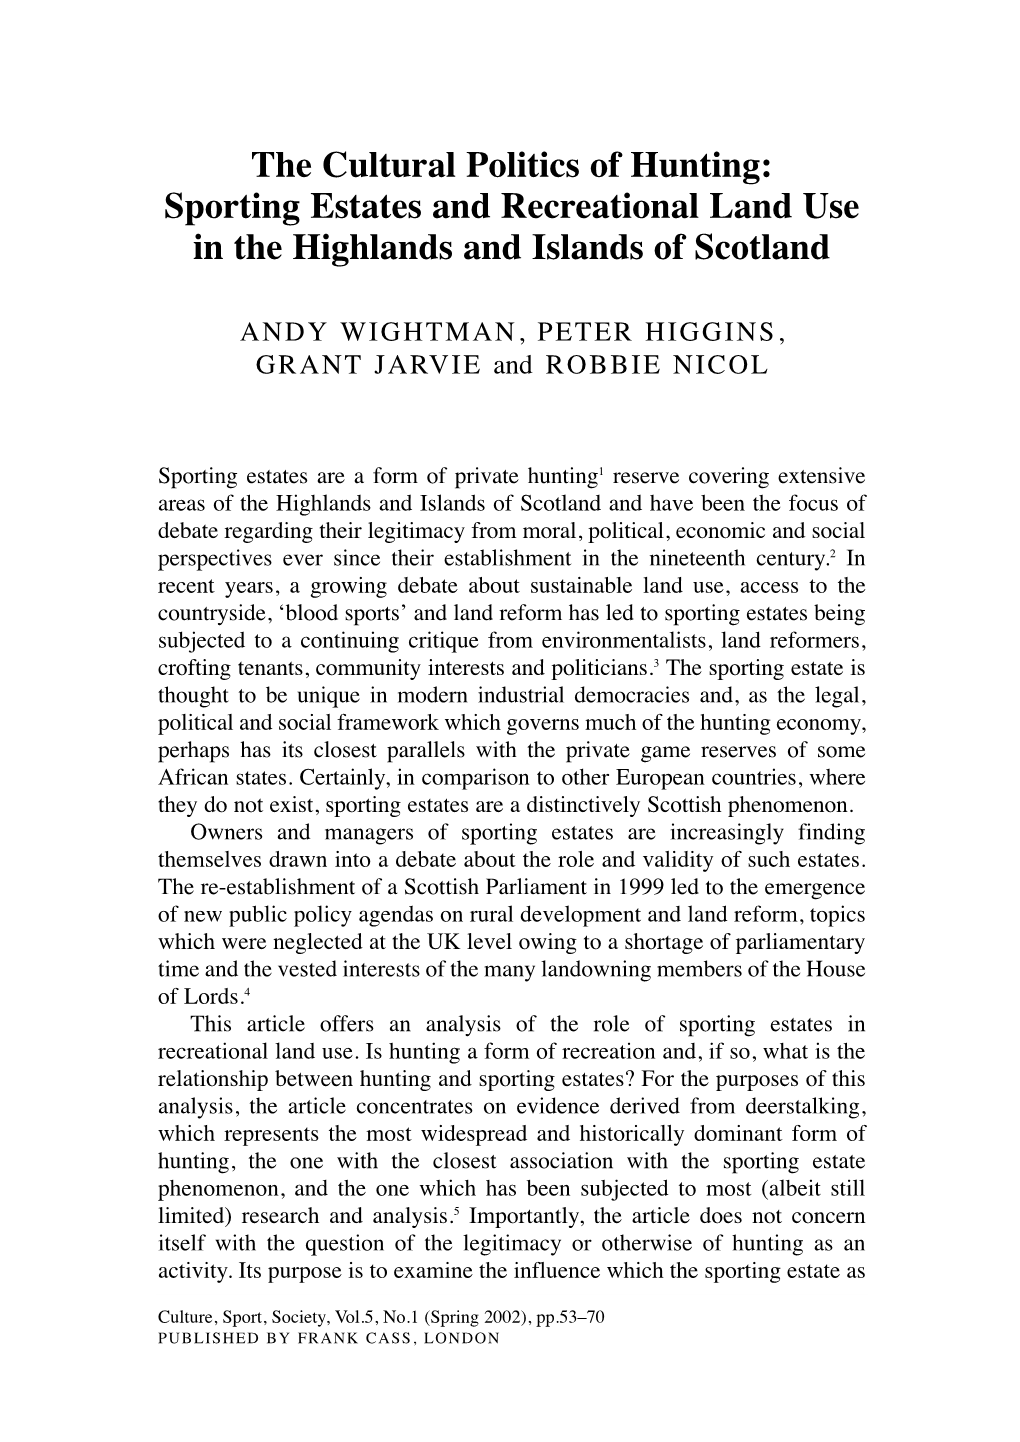 The Cultural Politics of Hunting: Sporting Estates and Recreational Land Use in the Highlands and Islands of Scotland